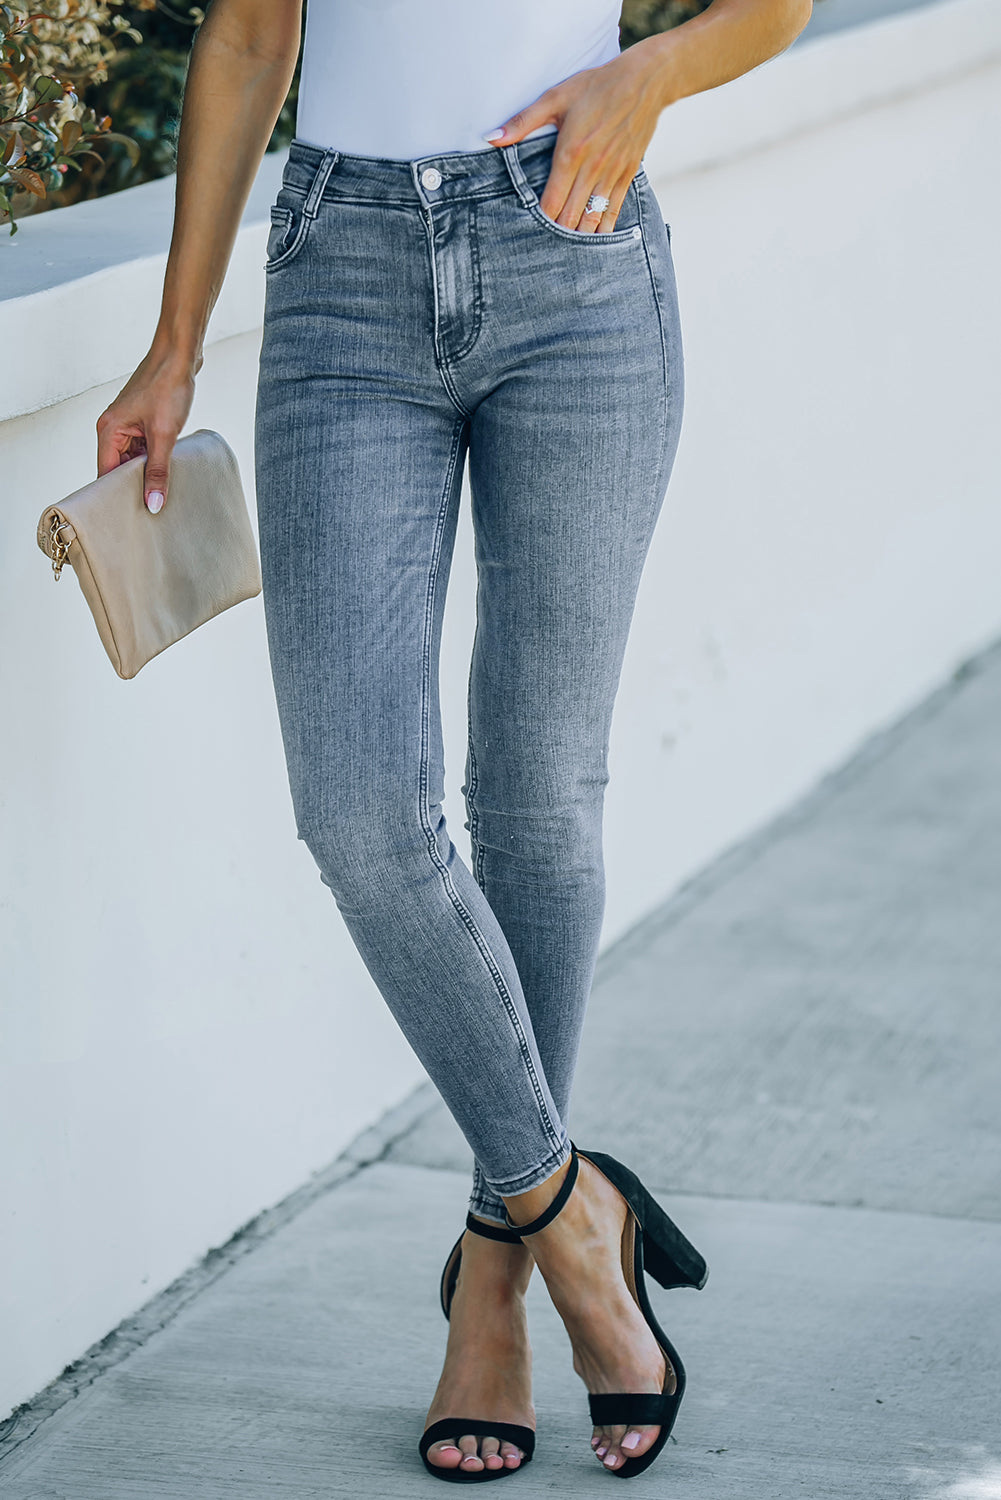 Buy Ankle-Length Skinny Jeans with Pockets by Faz